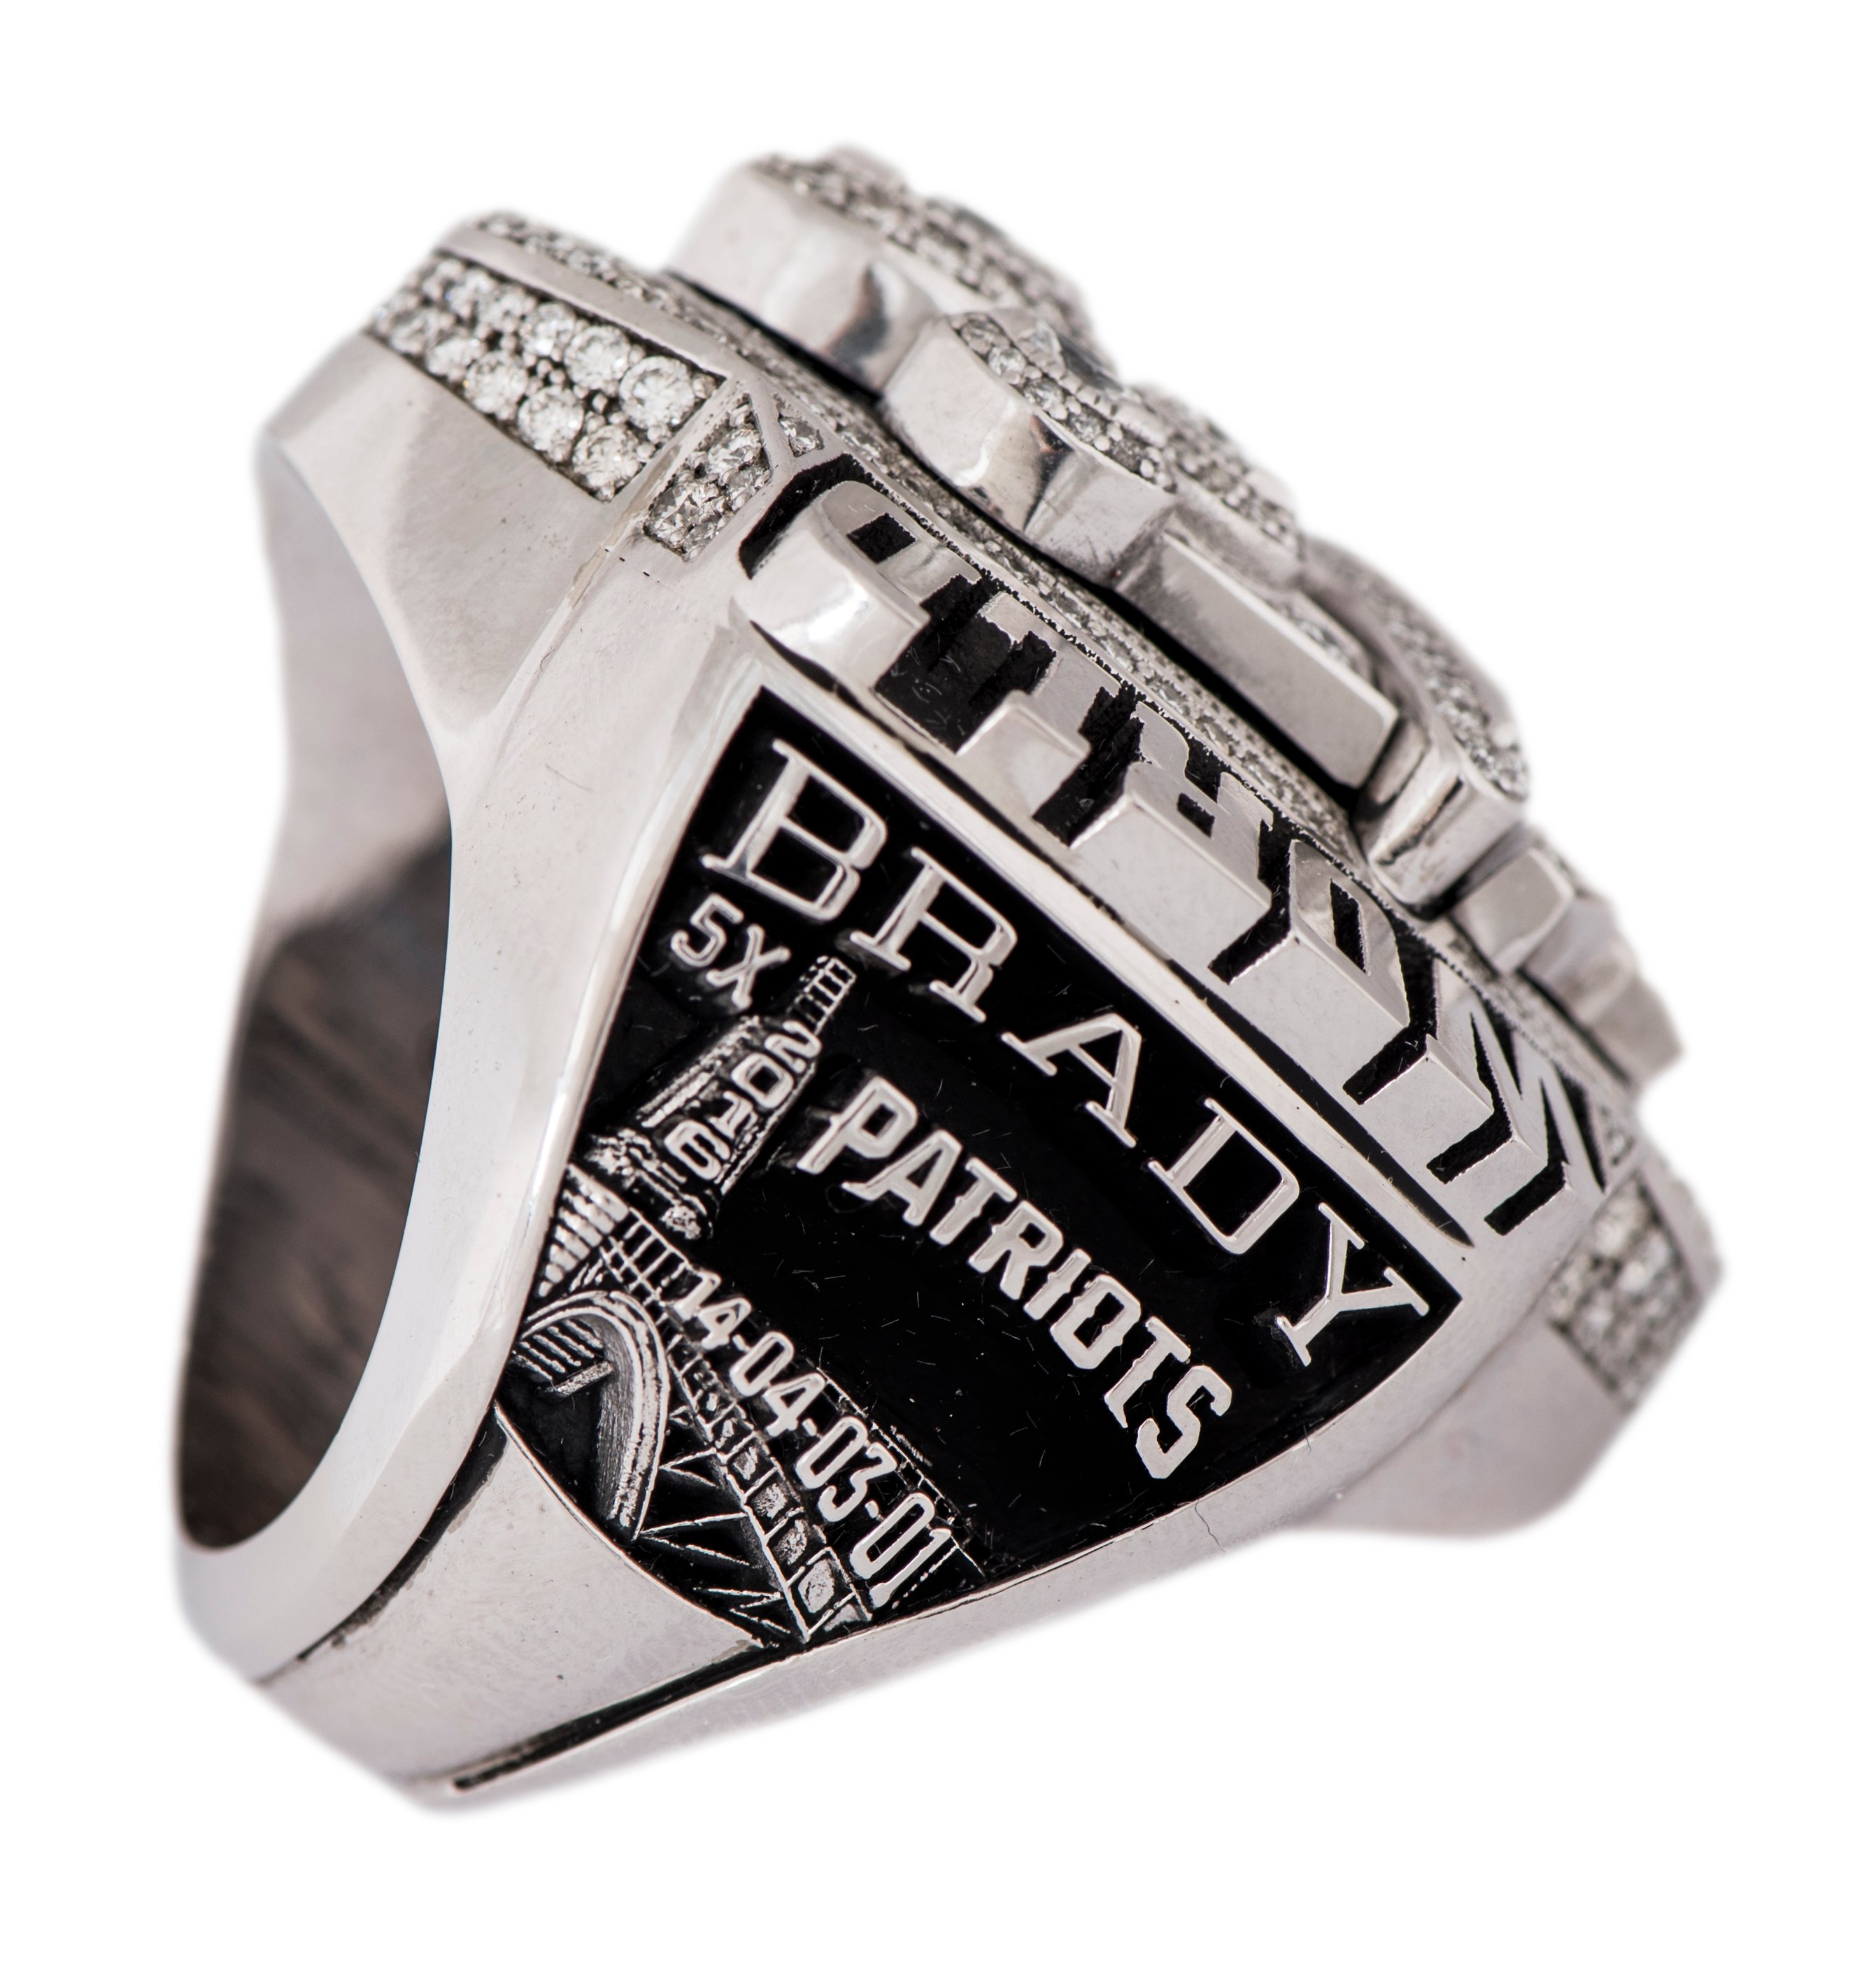 Super Bowl LI Ring of Mystery Patriot Player Is Up for Grabs at Heritage  Auctions | Clodius & Co. Jewelers